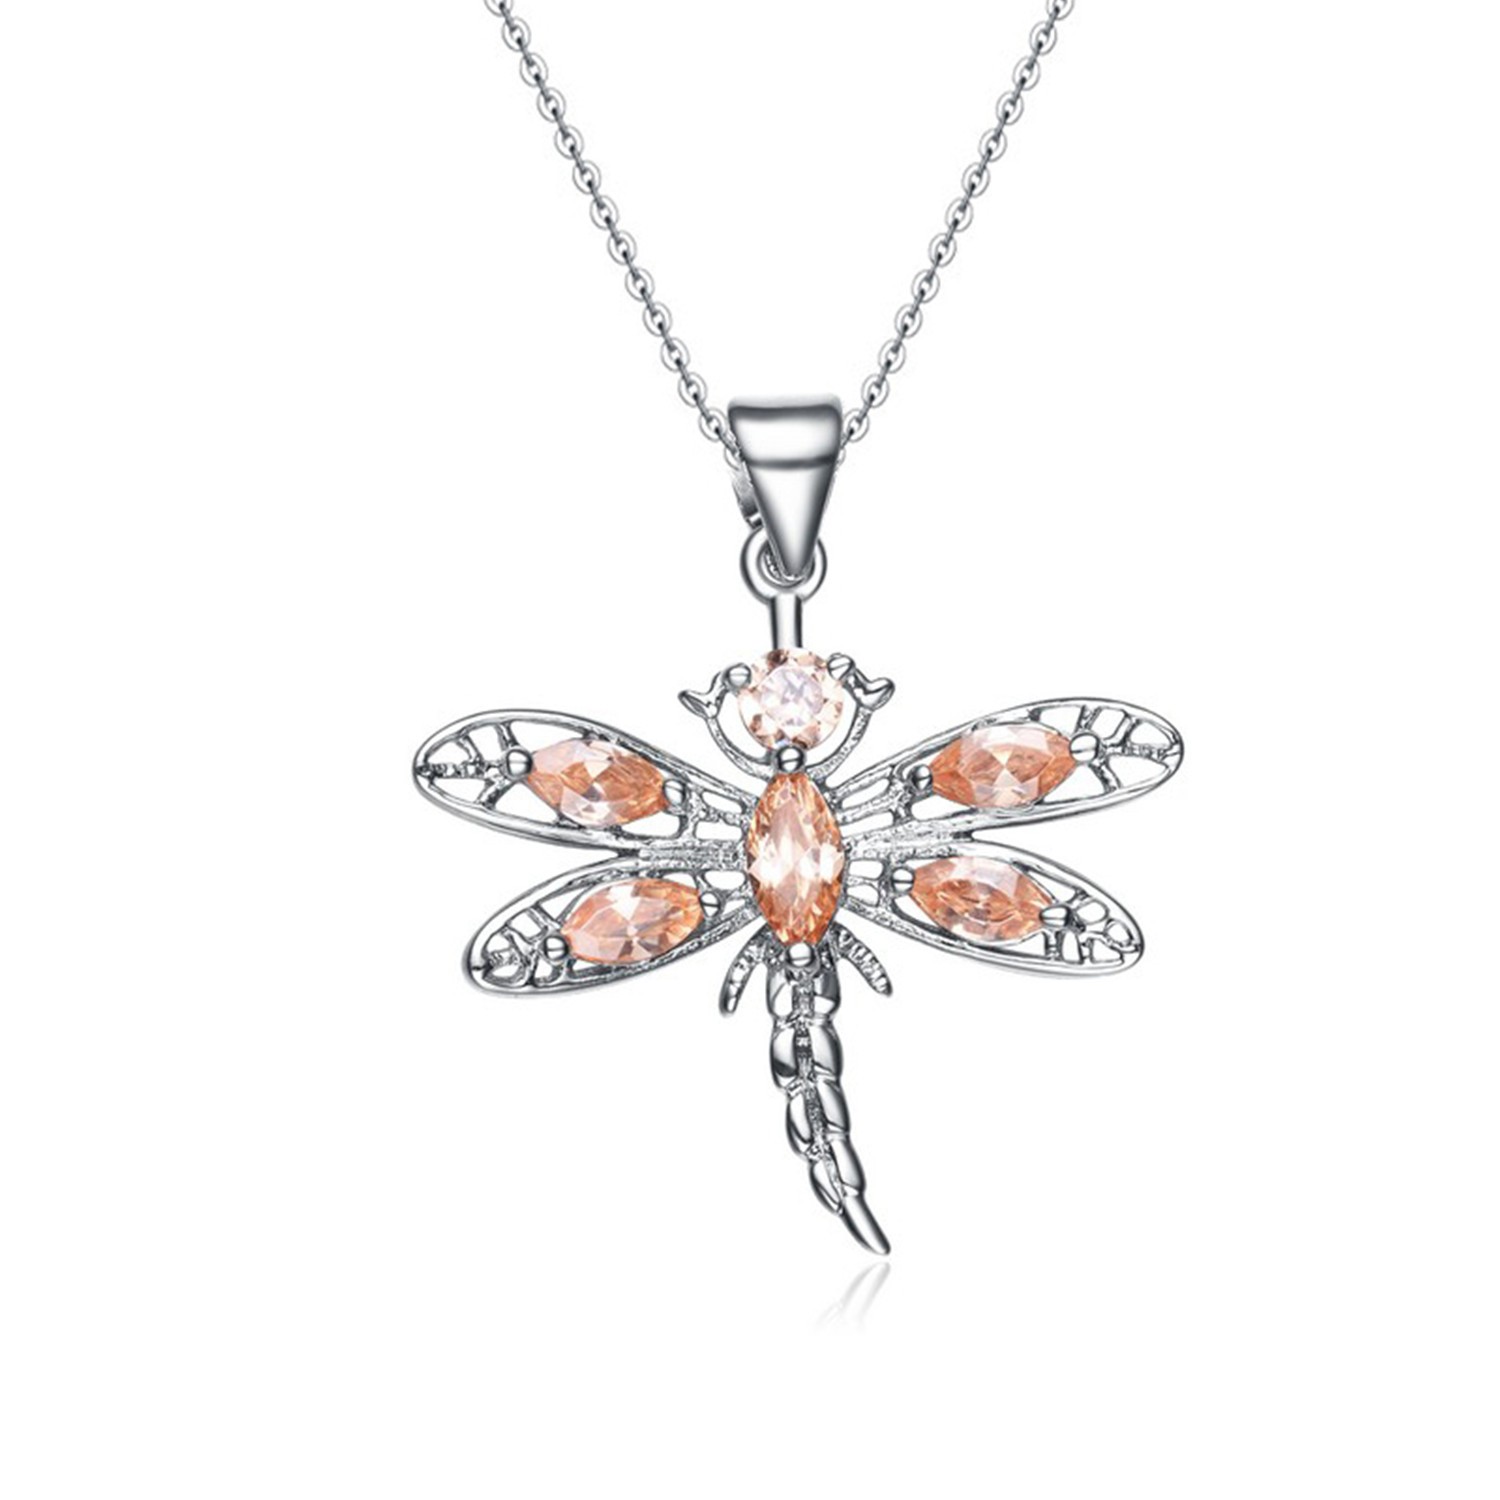 Jewelry Manfacturer 925Silver Rhodium Plated Necklace Orange CZ Dragonfly Pendant Necklace 